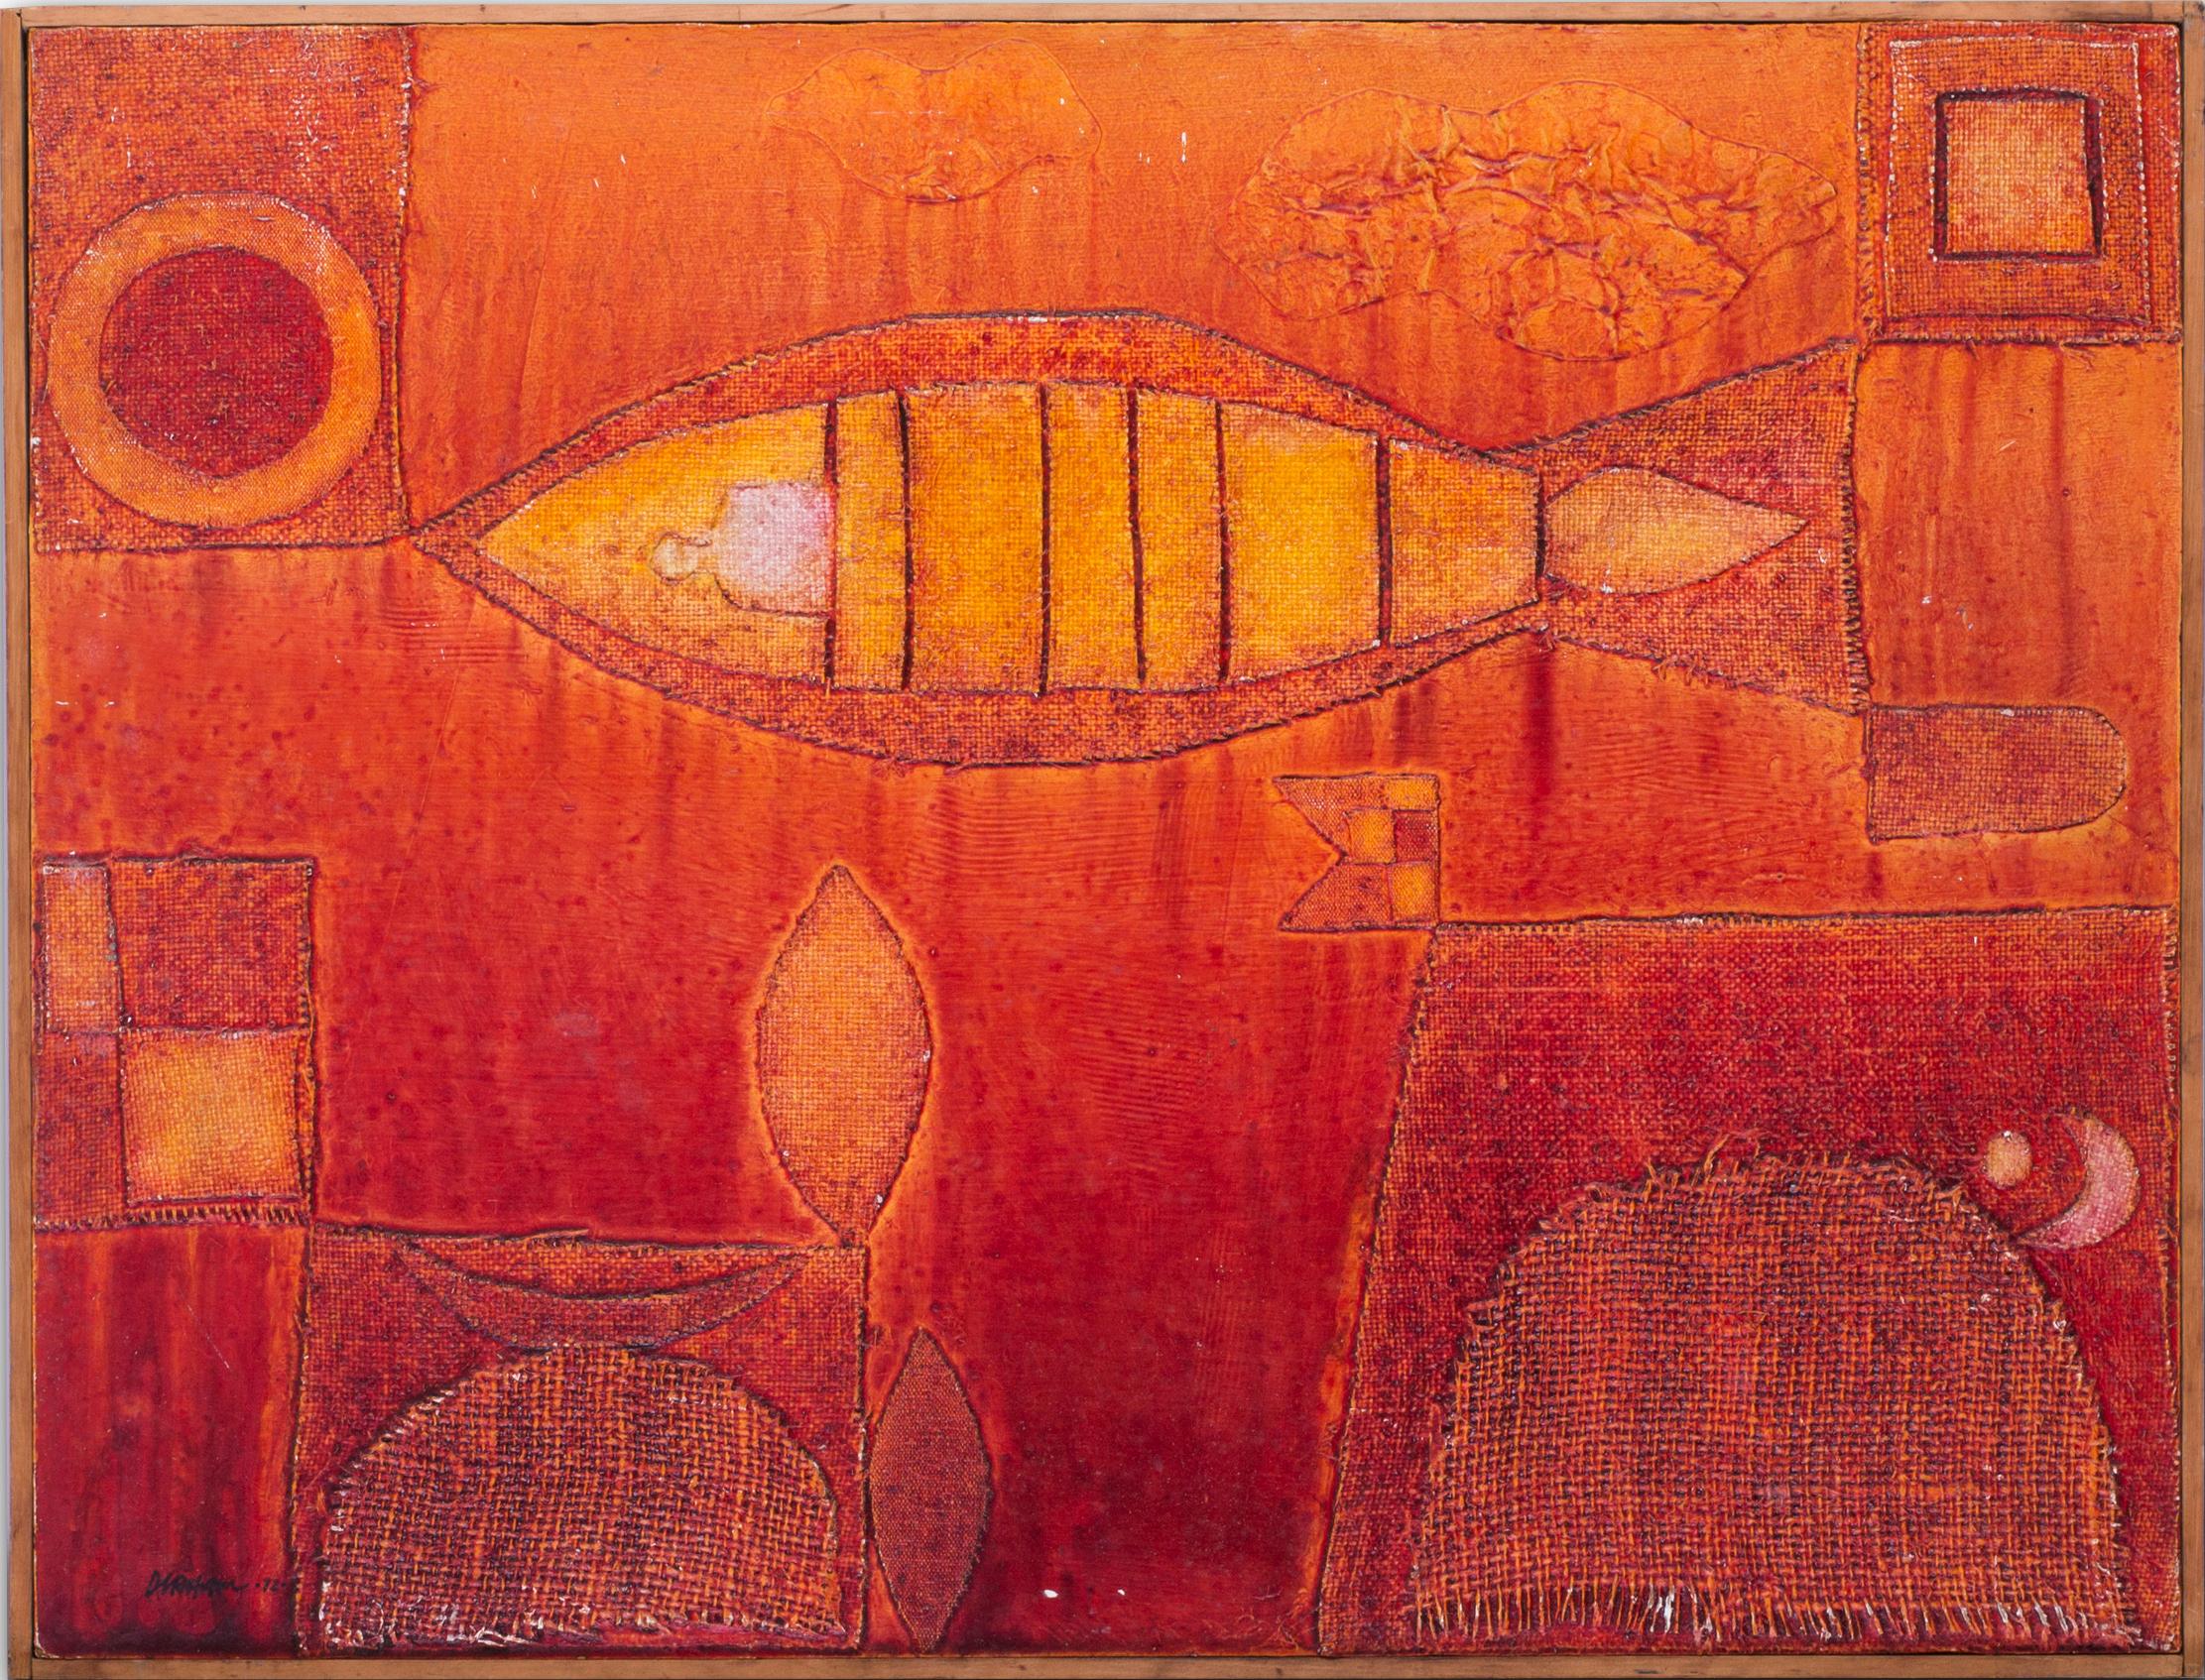 Golden Rocket Morning, (20th century, British abstract painting, orange tones) - Mixed Media Art by Terry Durham